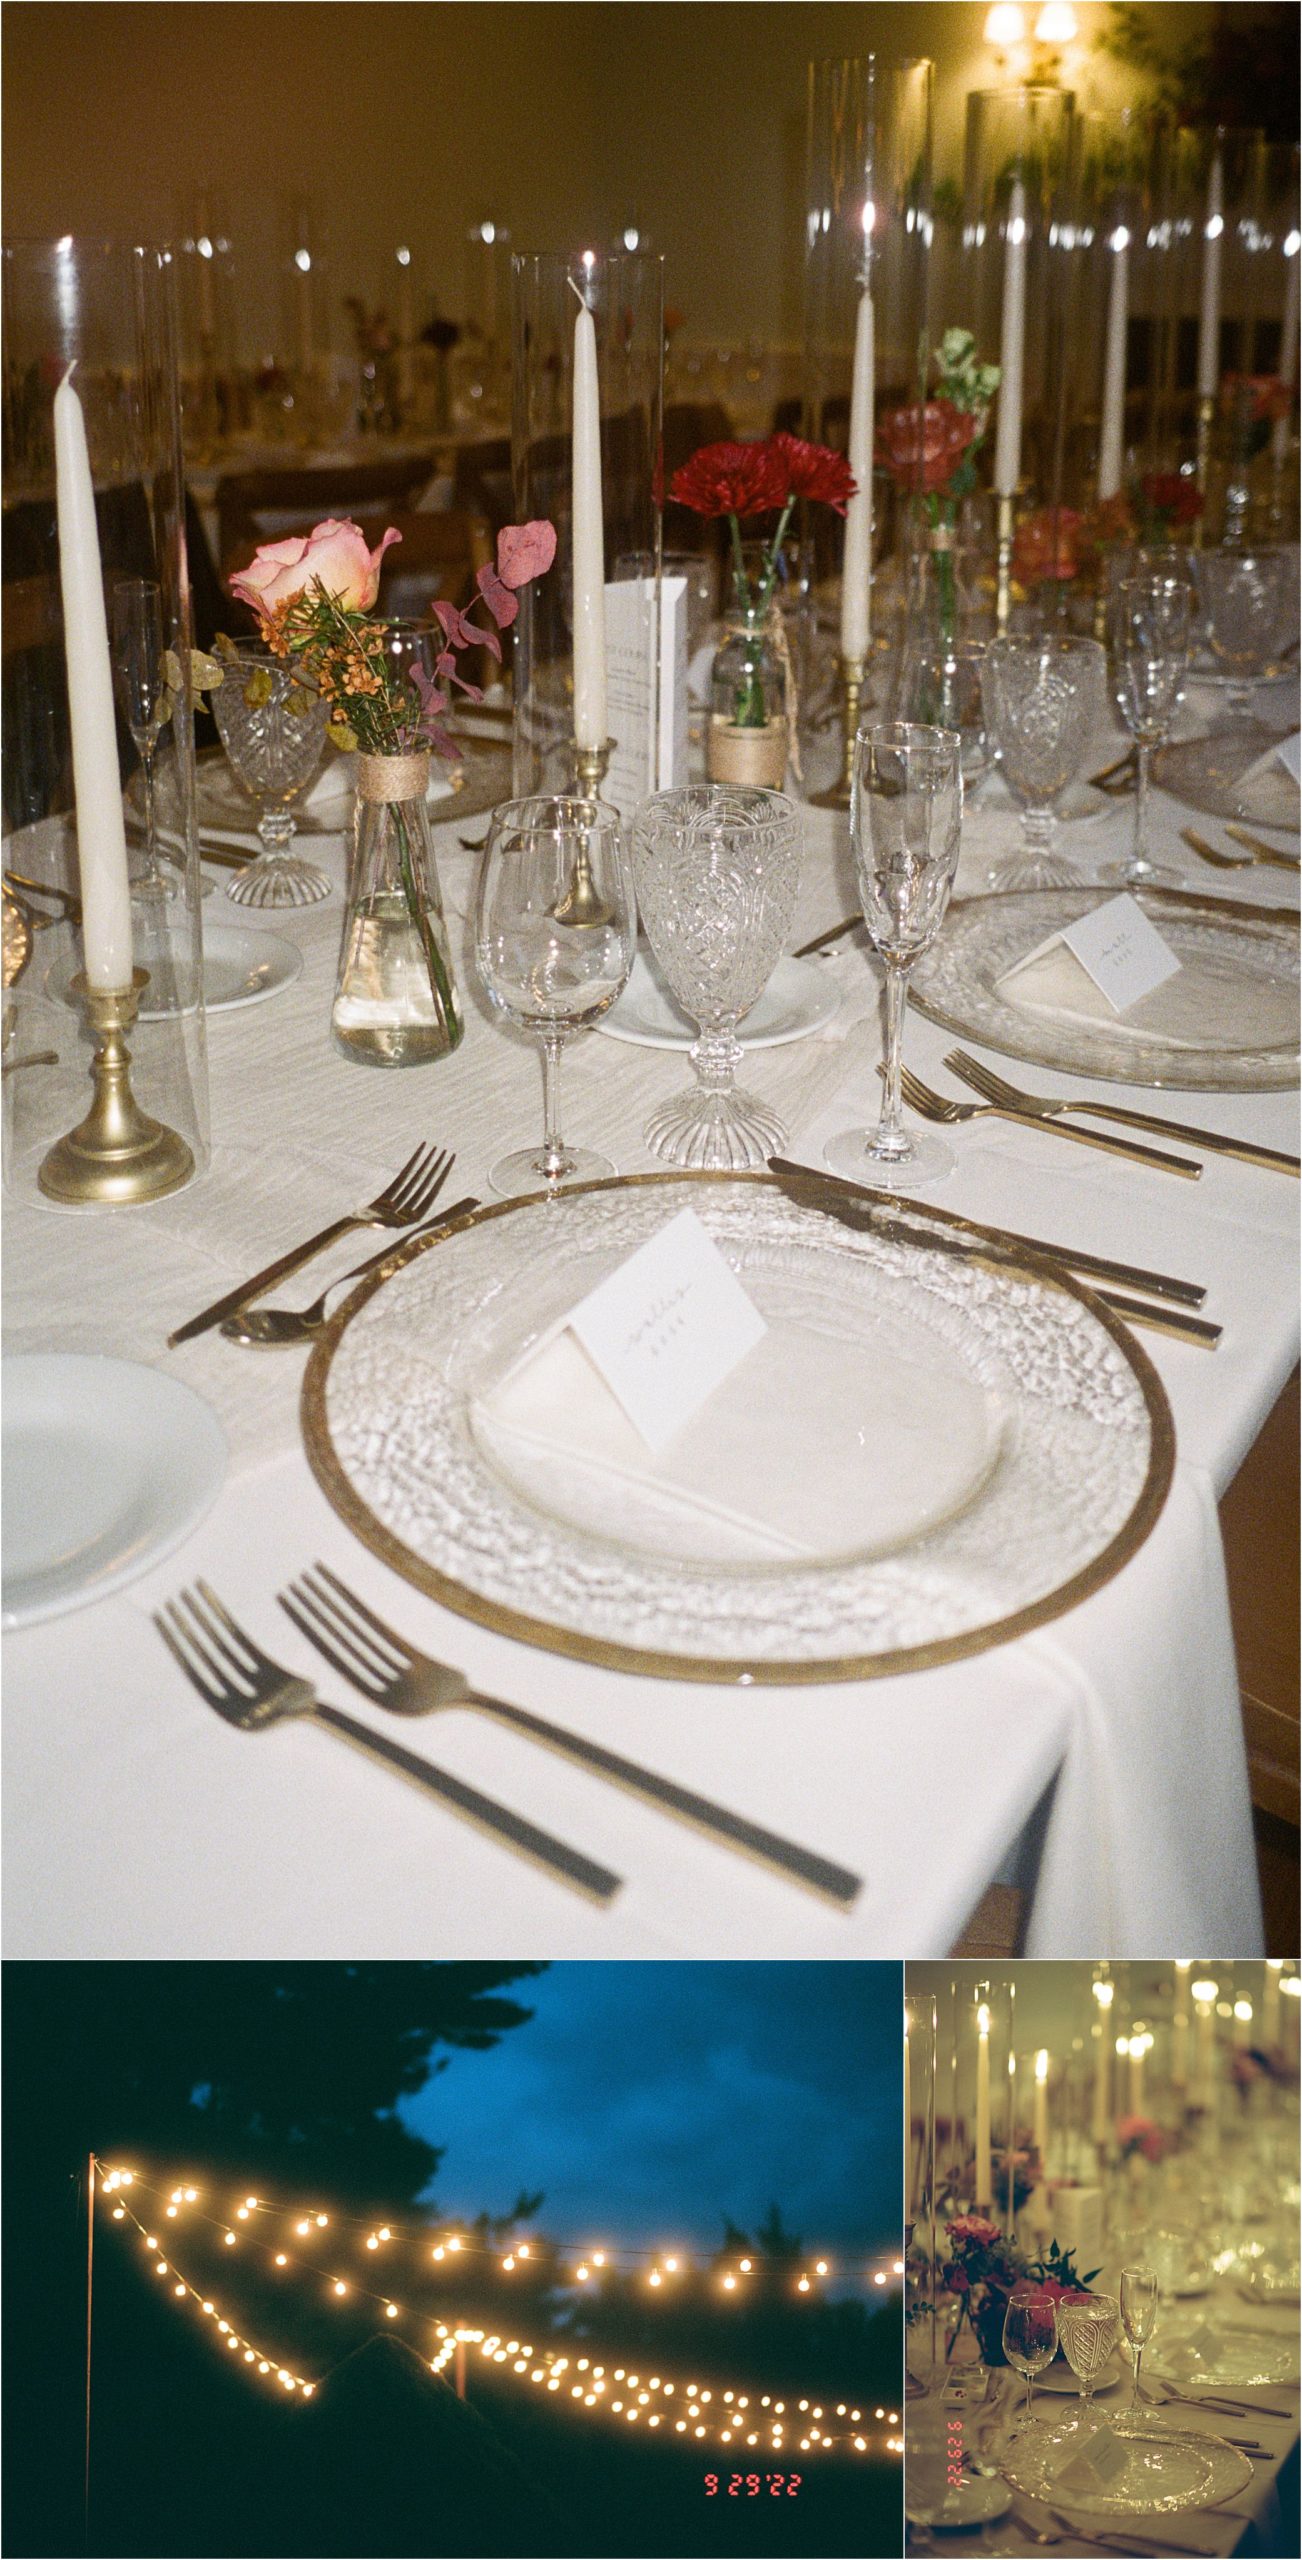 Candles light a long white table set with glassware and florals for the New England wedding reception.